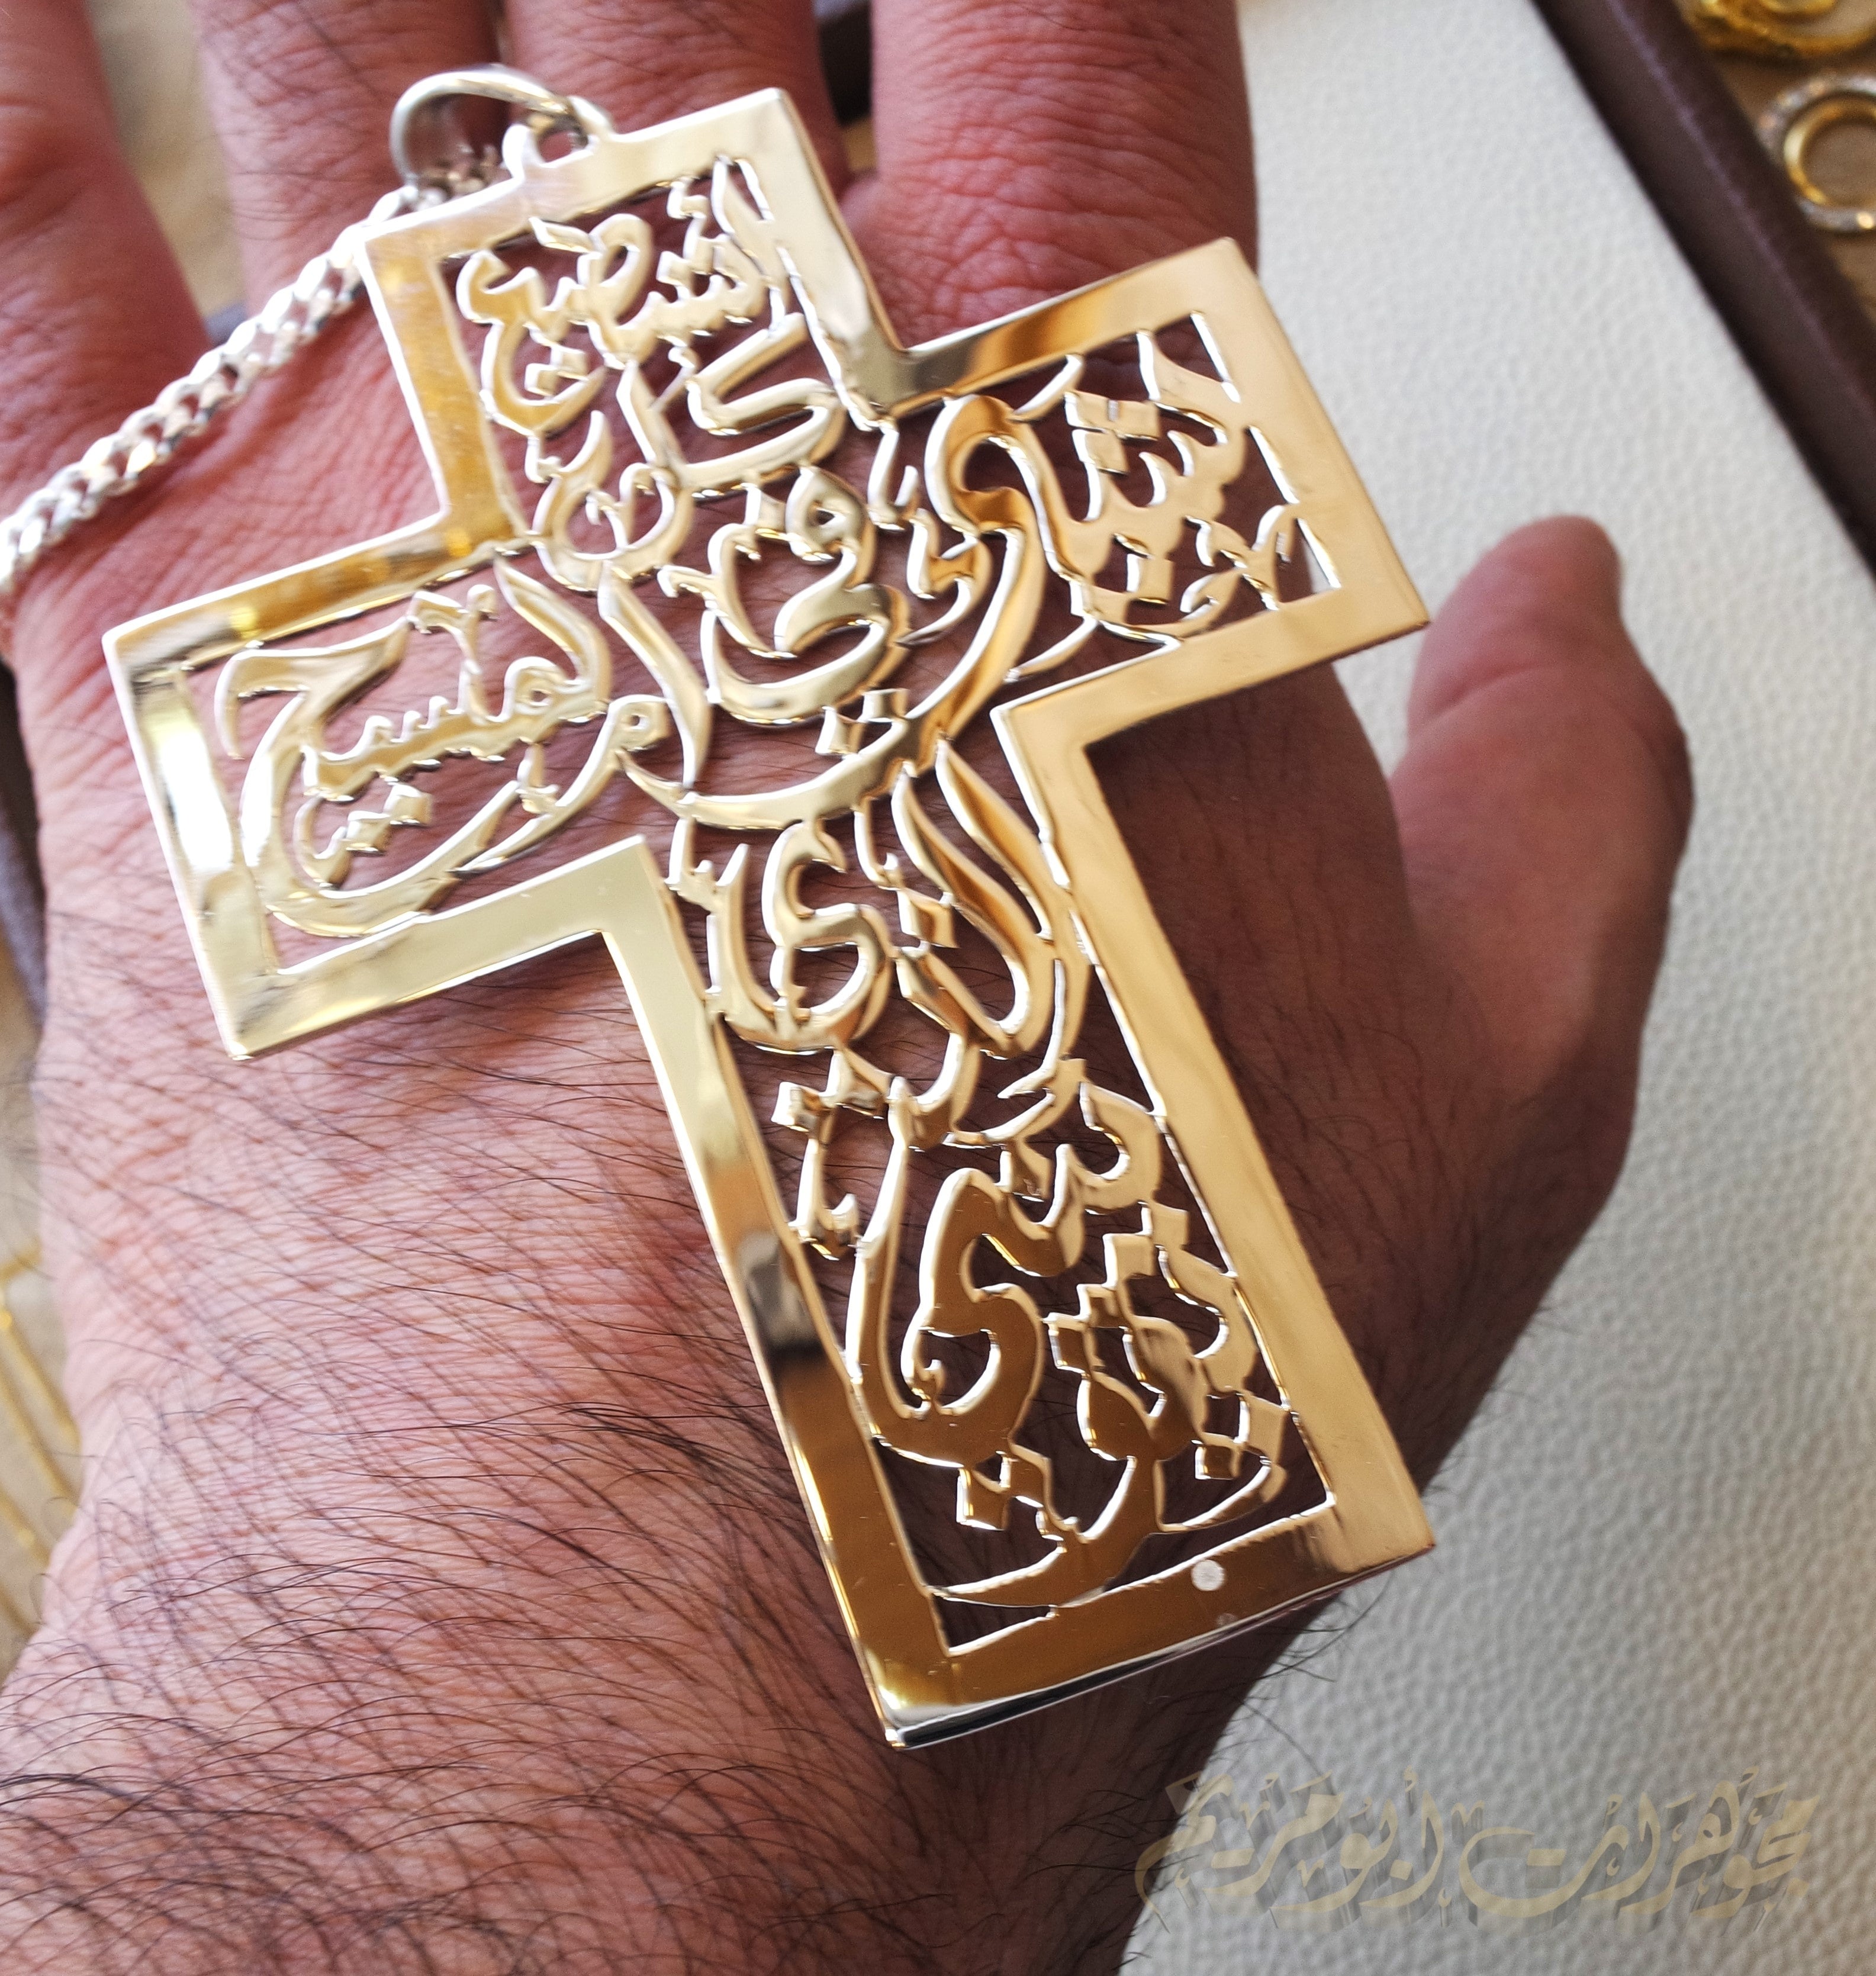 Very huge Arabic calligraphy cross necklace 2 sterling silver 925 jewelry catholic orthodox Christianity handmade heavy thick fast shipping